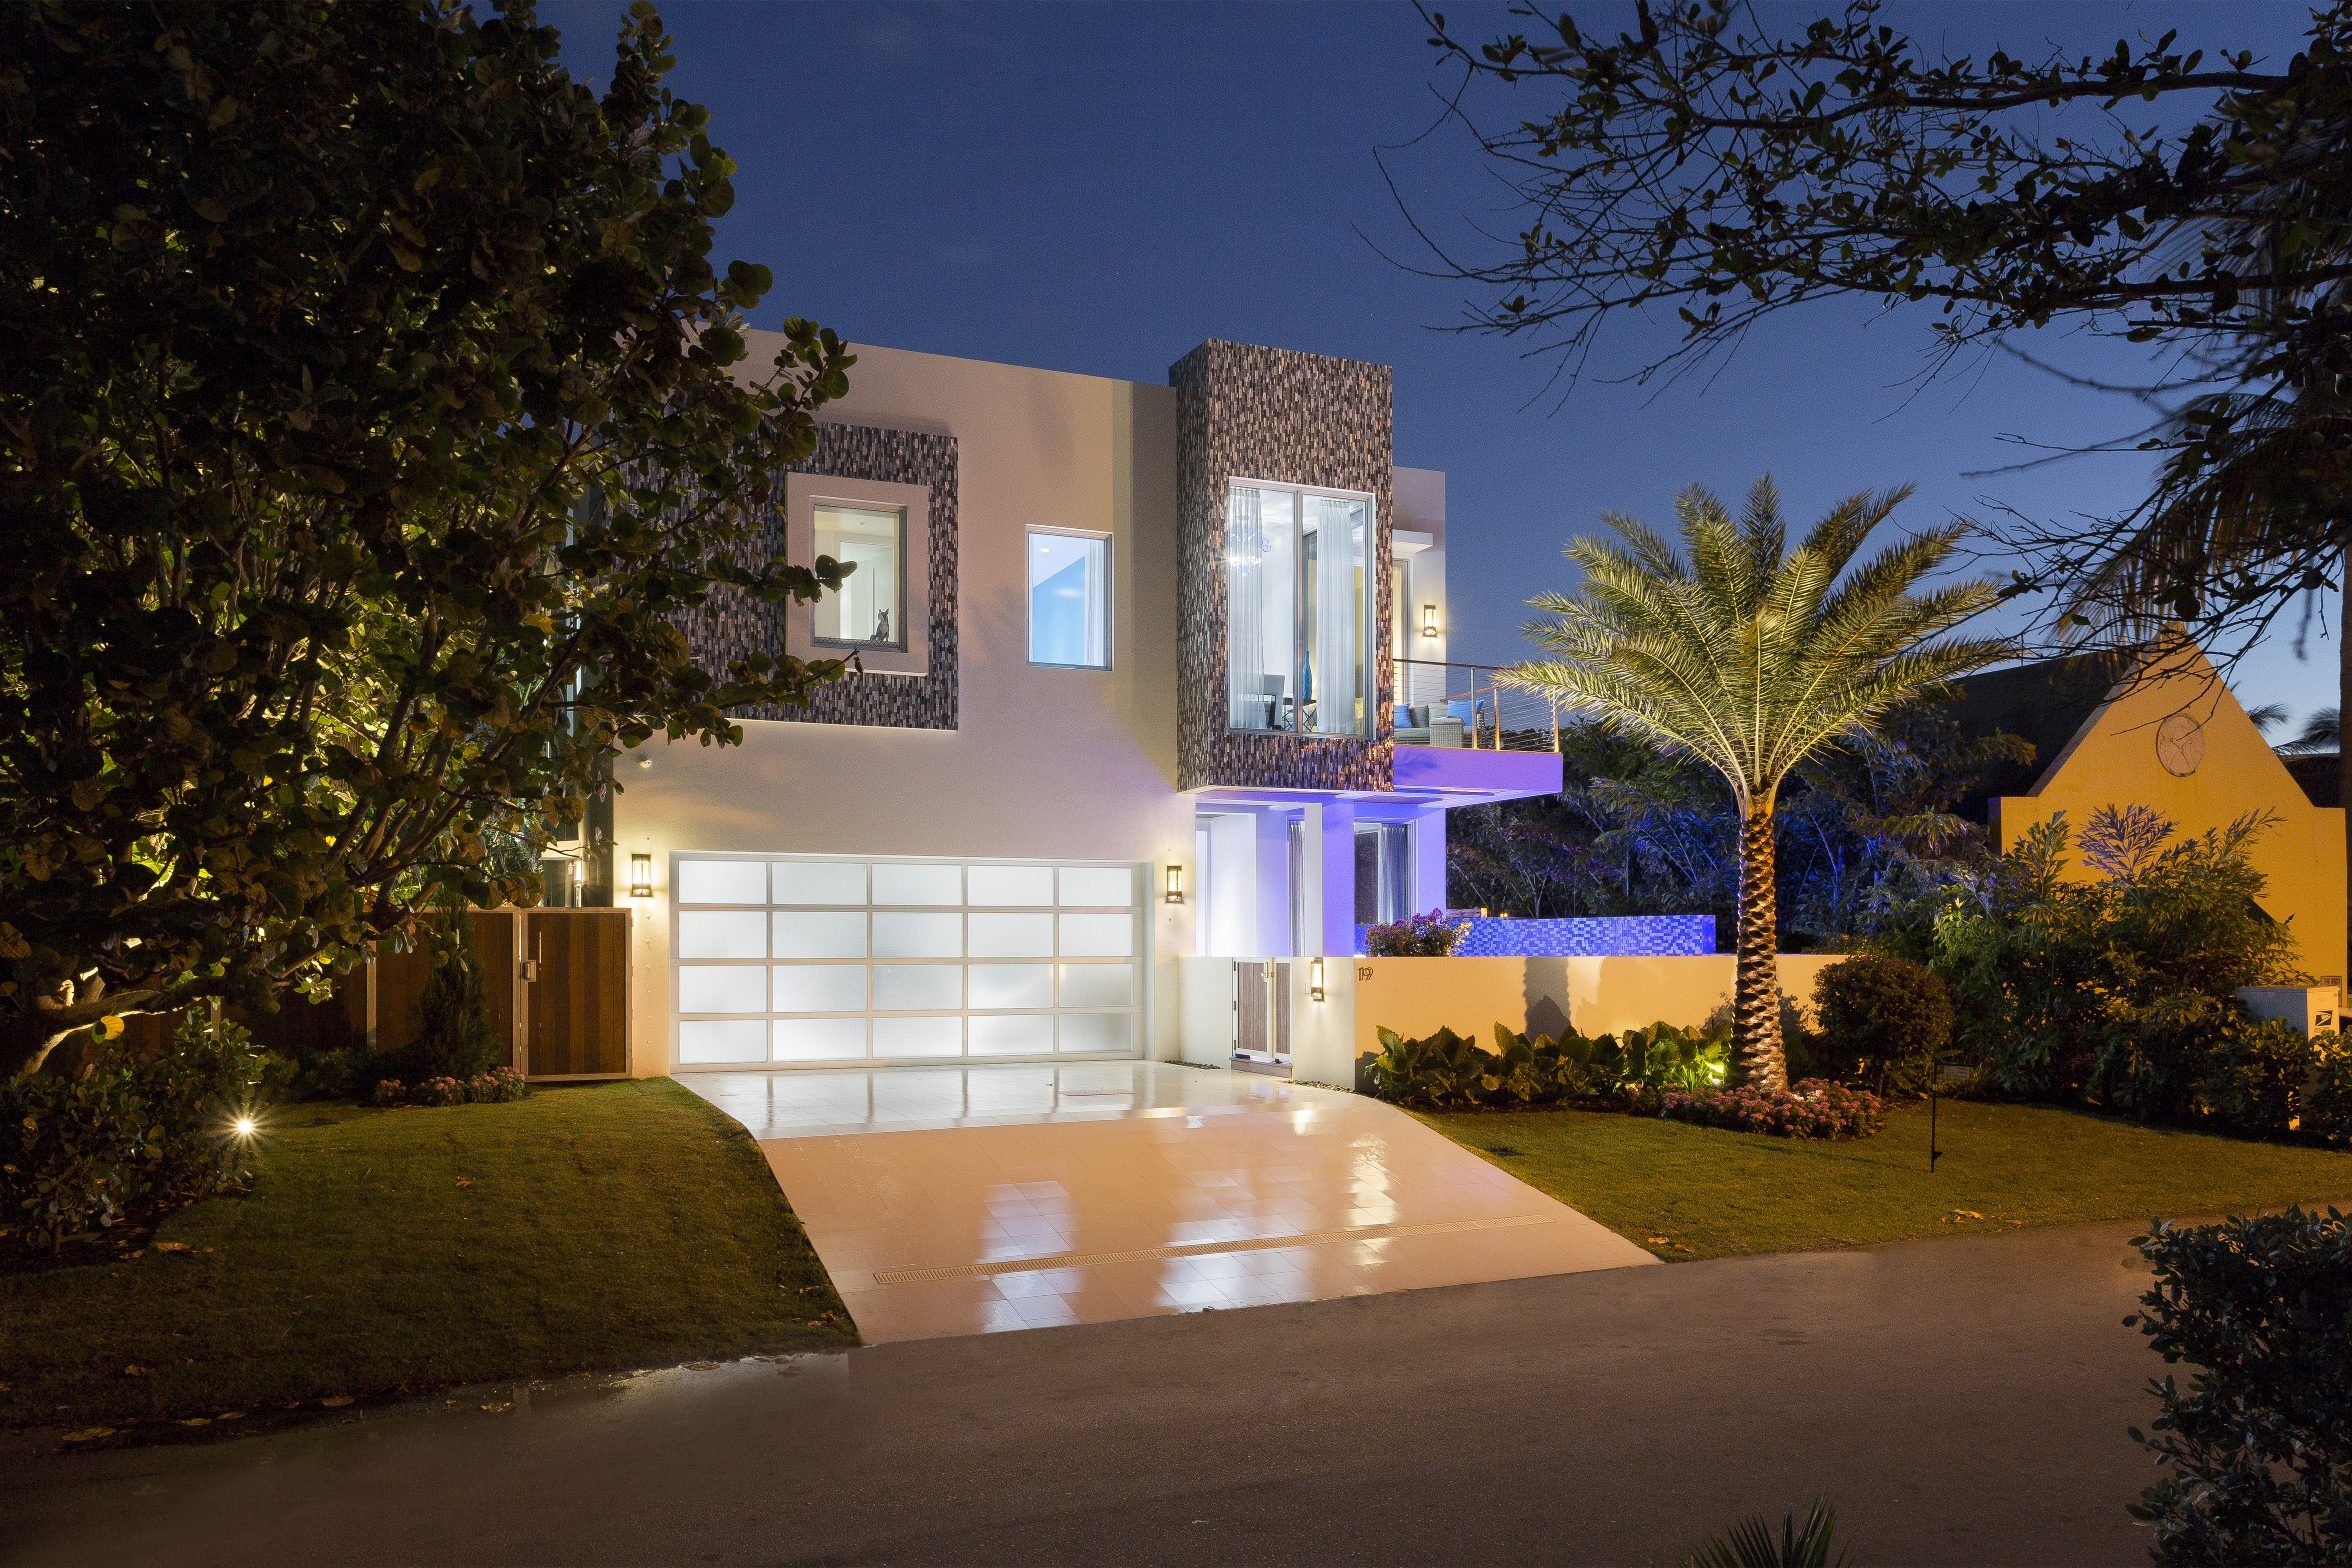 Modern micro mansion in Florida with neon lighting, multiple stories, and a garage door